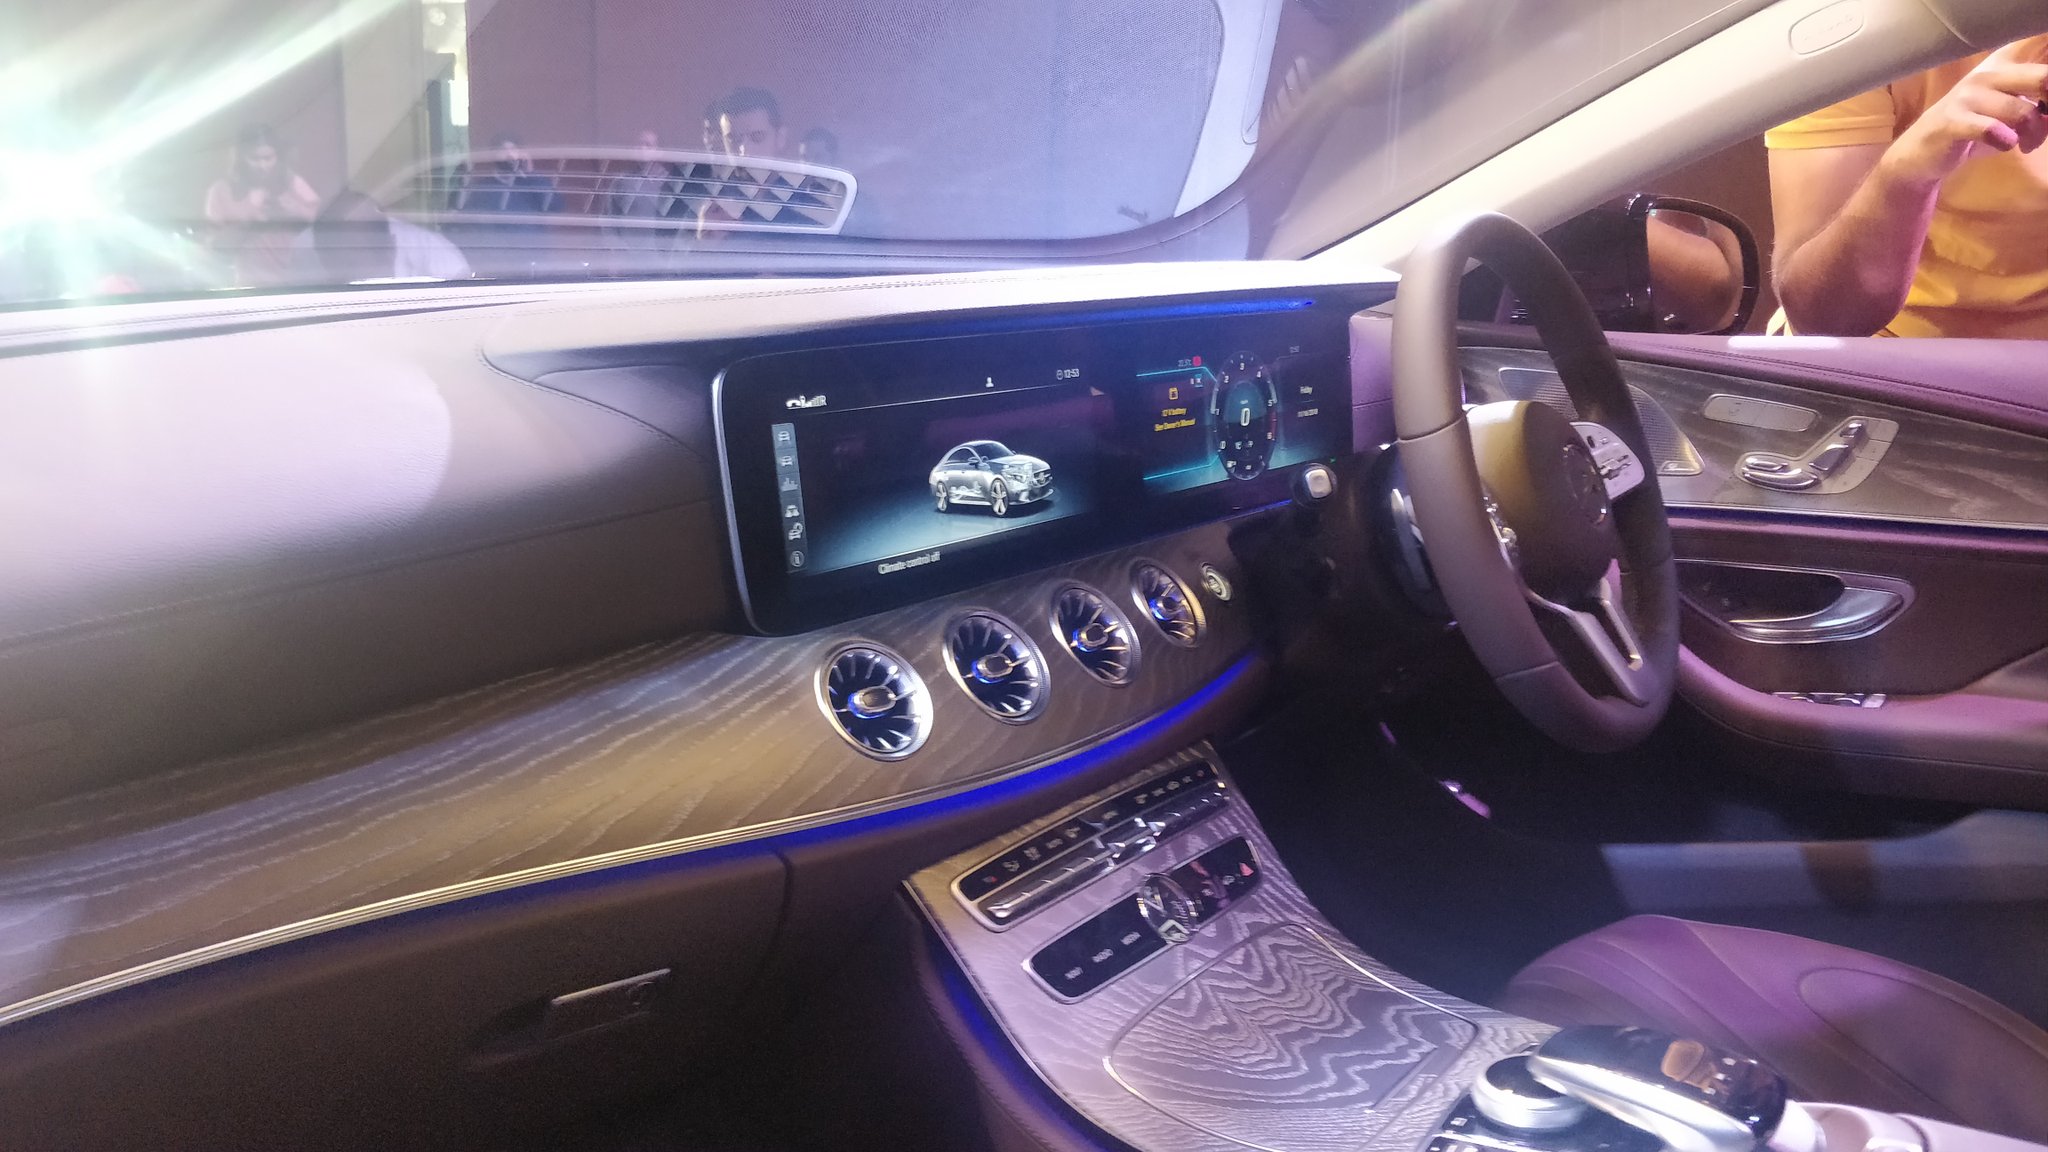 <p>The New CLS gets an interior influenced by both the S-Class and E-Class. Most notable is the seamless MBUX infotainment, the turbine style vents and the steering wheel encased in Nappa leather.</p>